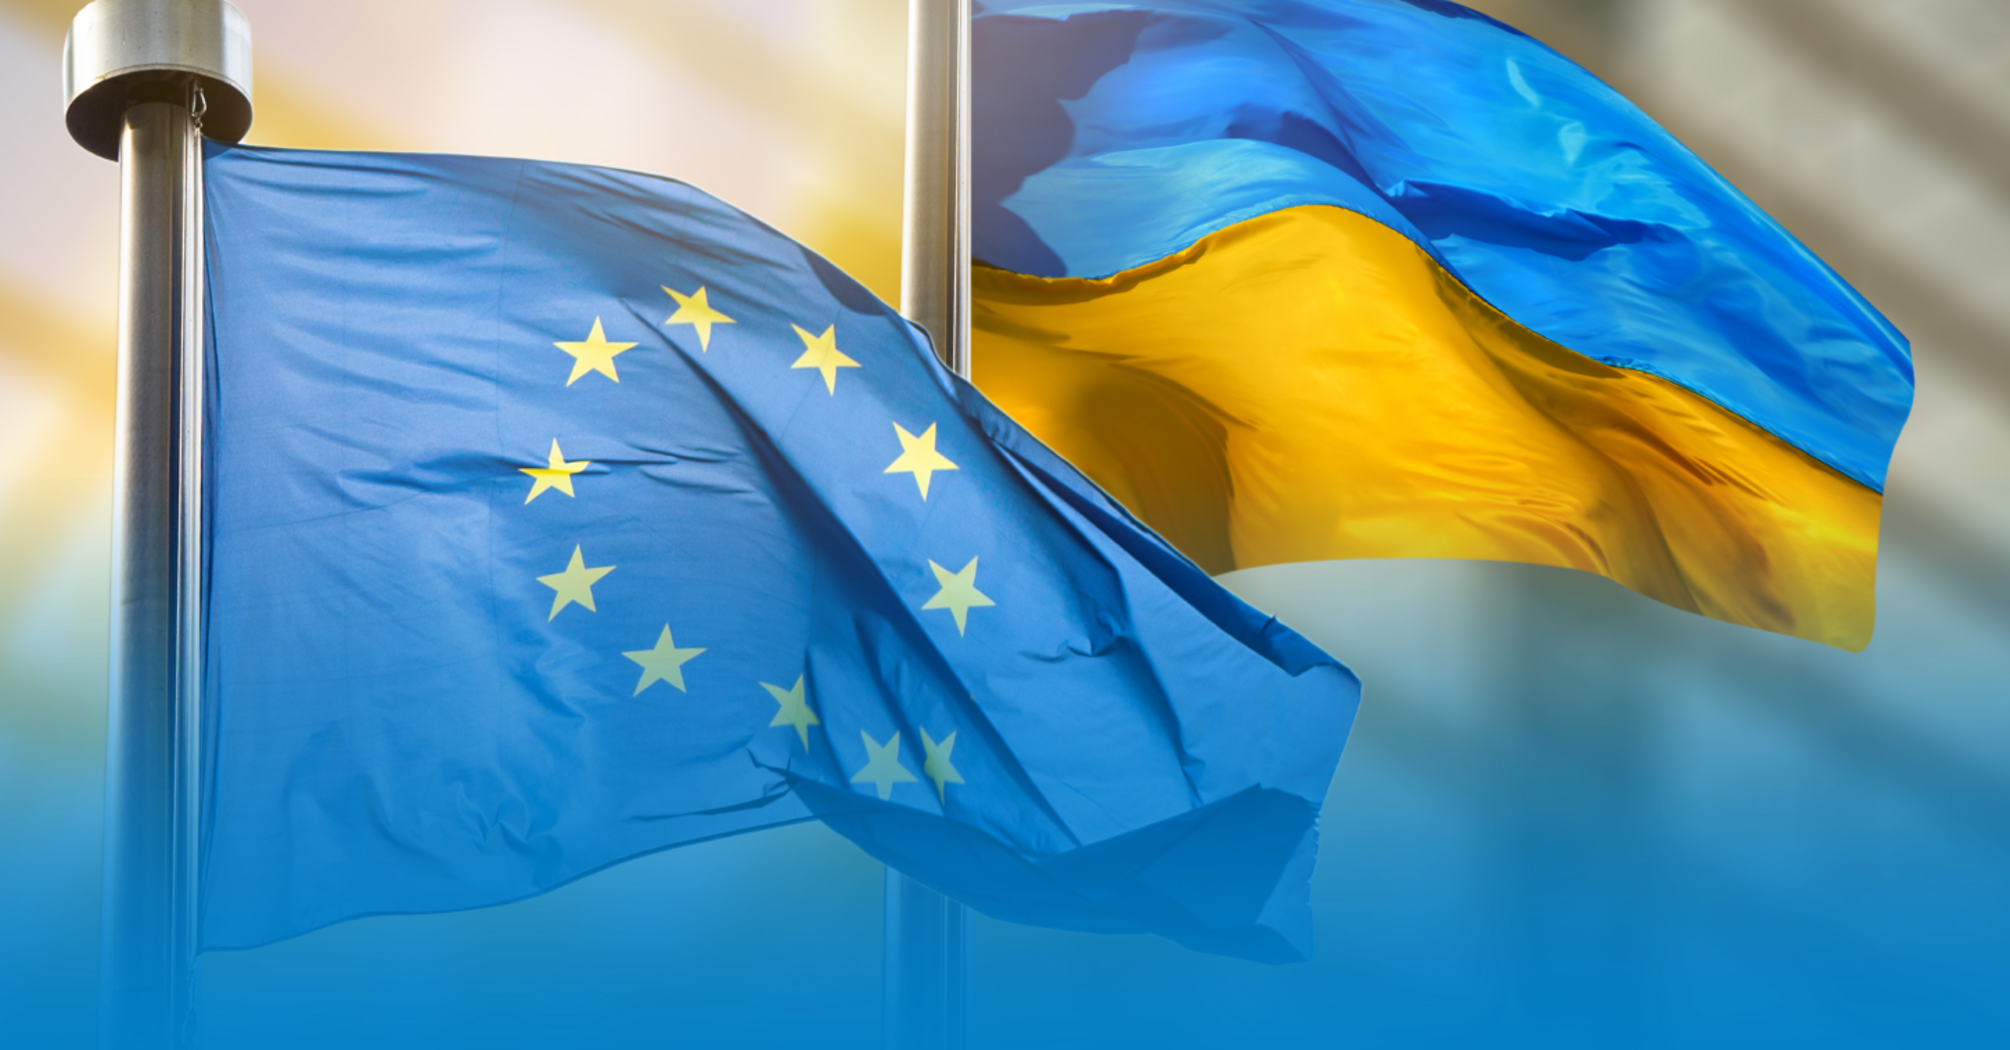 Negotiations on Ukraine's accession to the EU will start on June 25